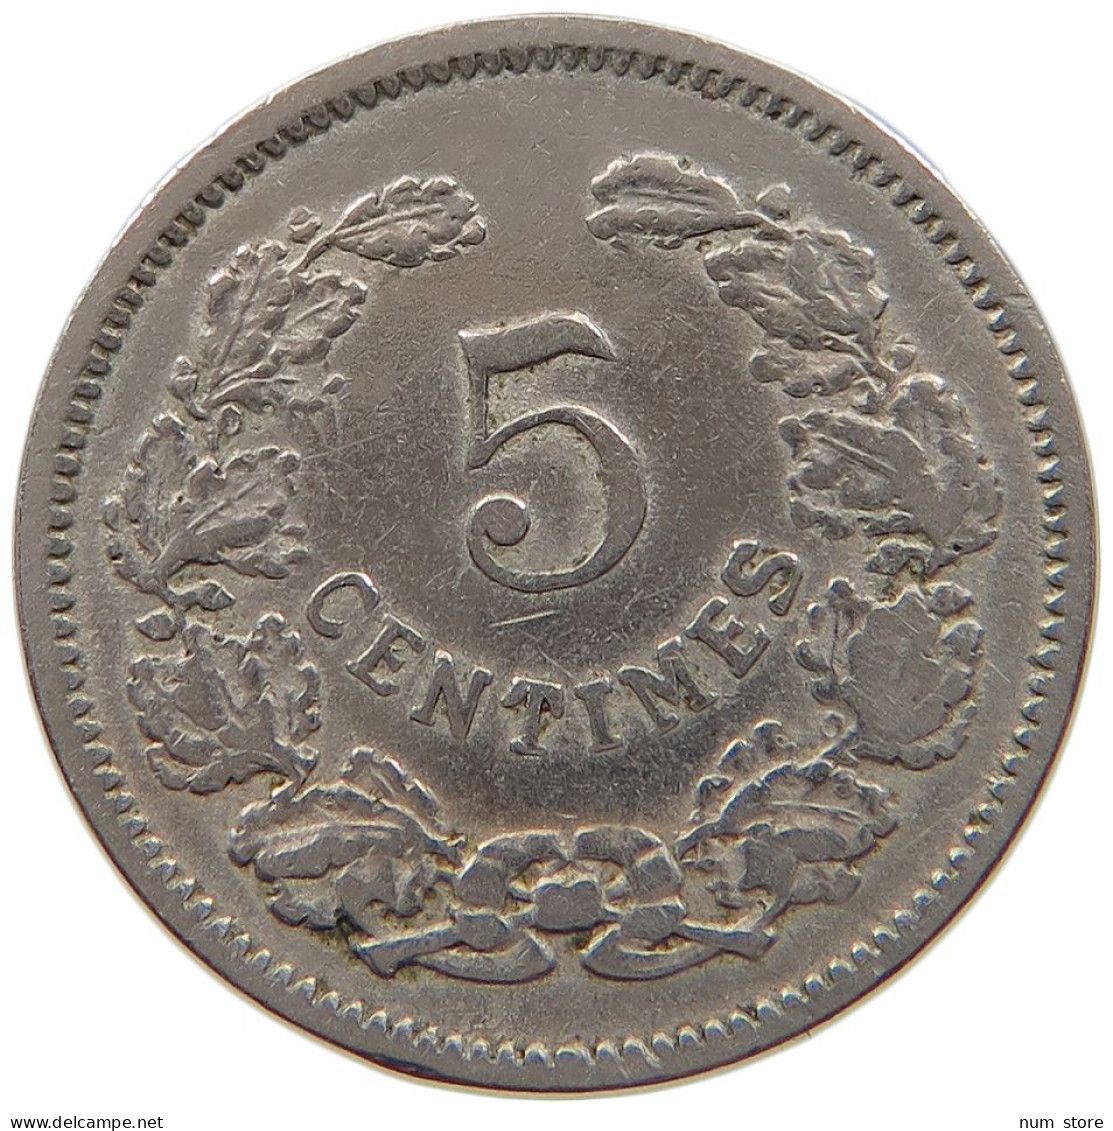 LUXEMBOURG 5 CENTIMES 1901 #a047 0721 - Luxembourg